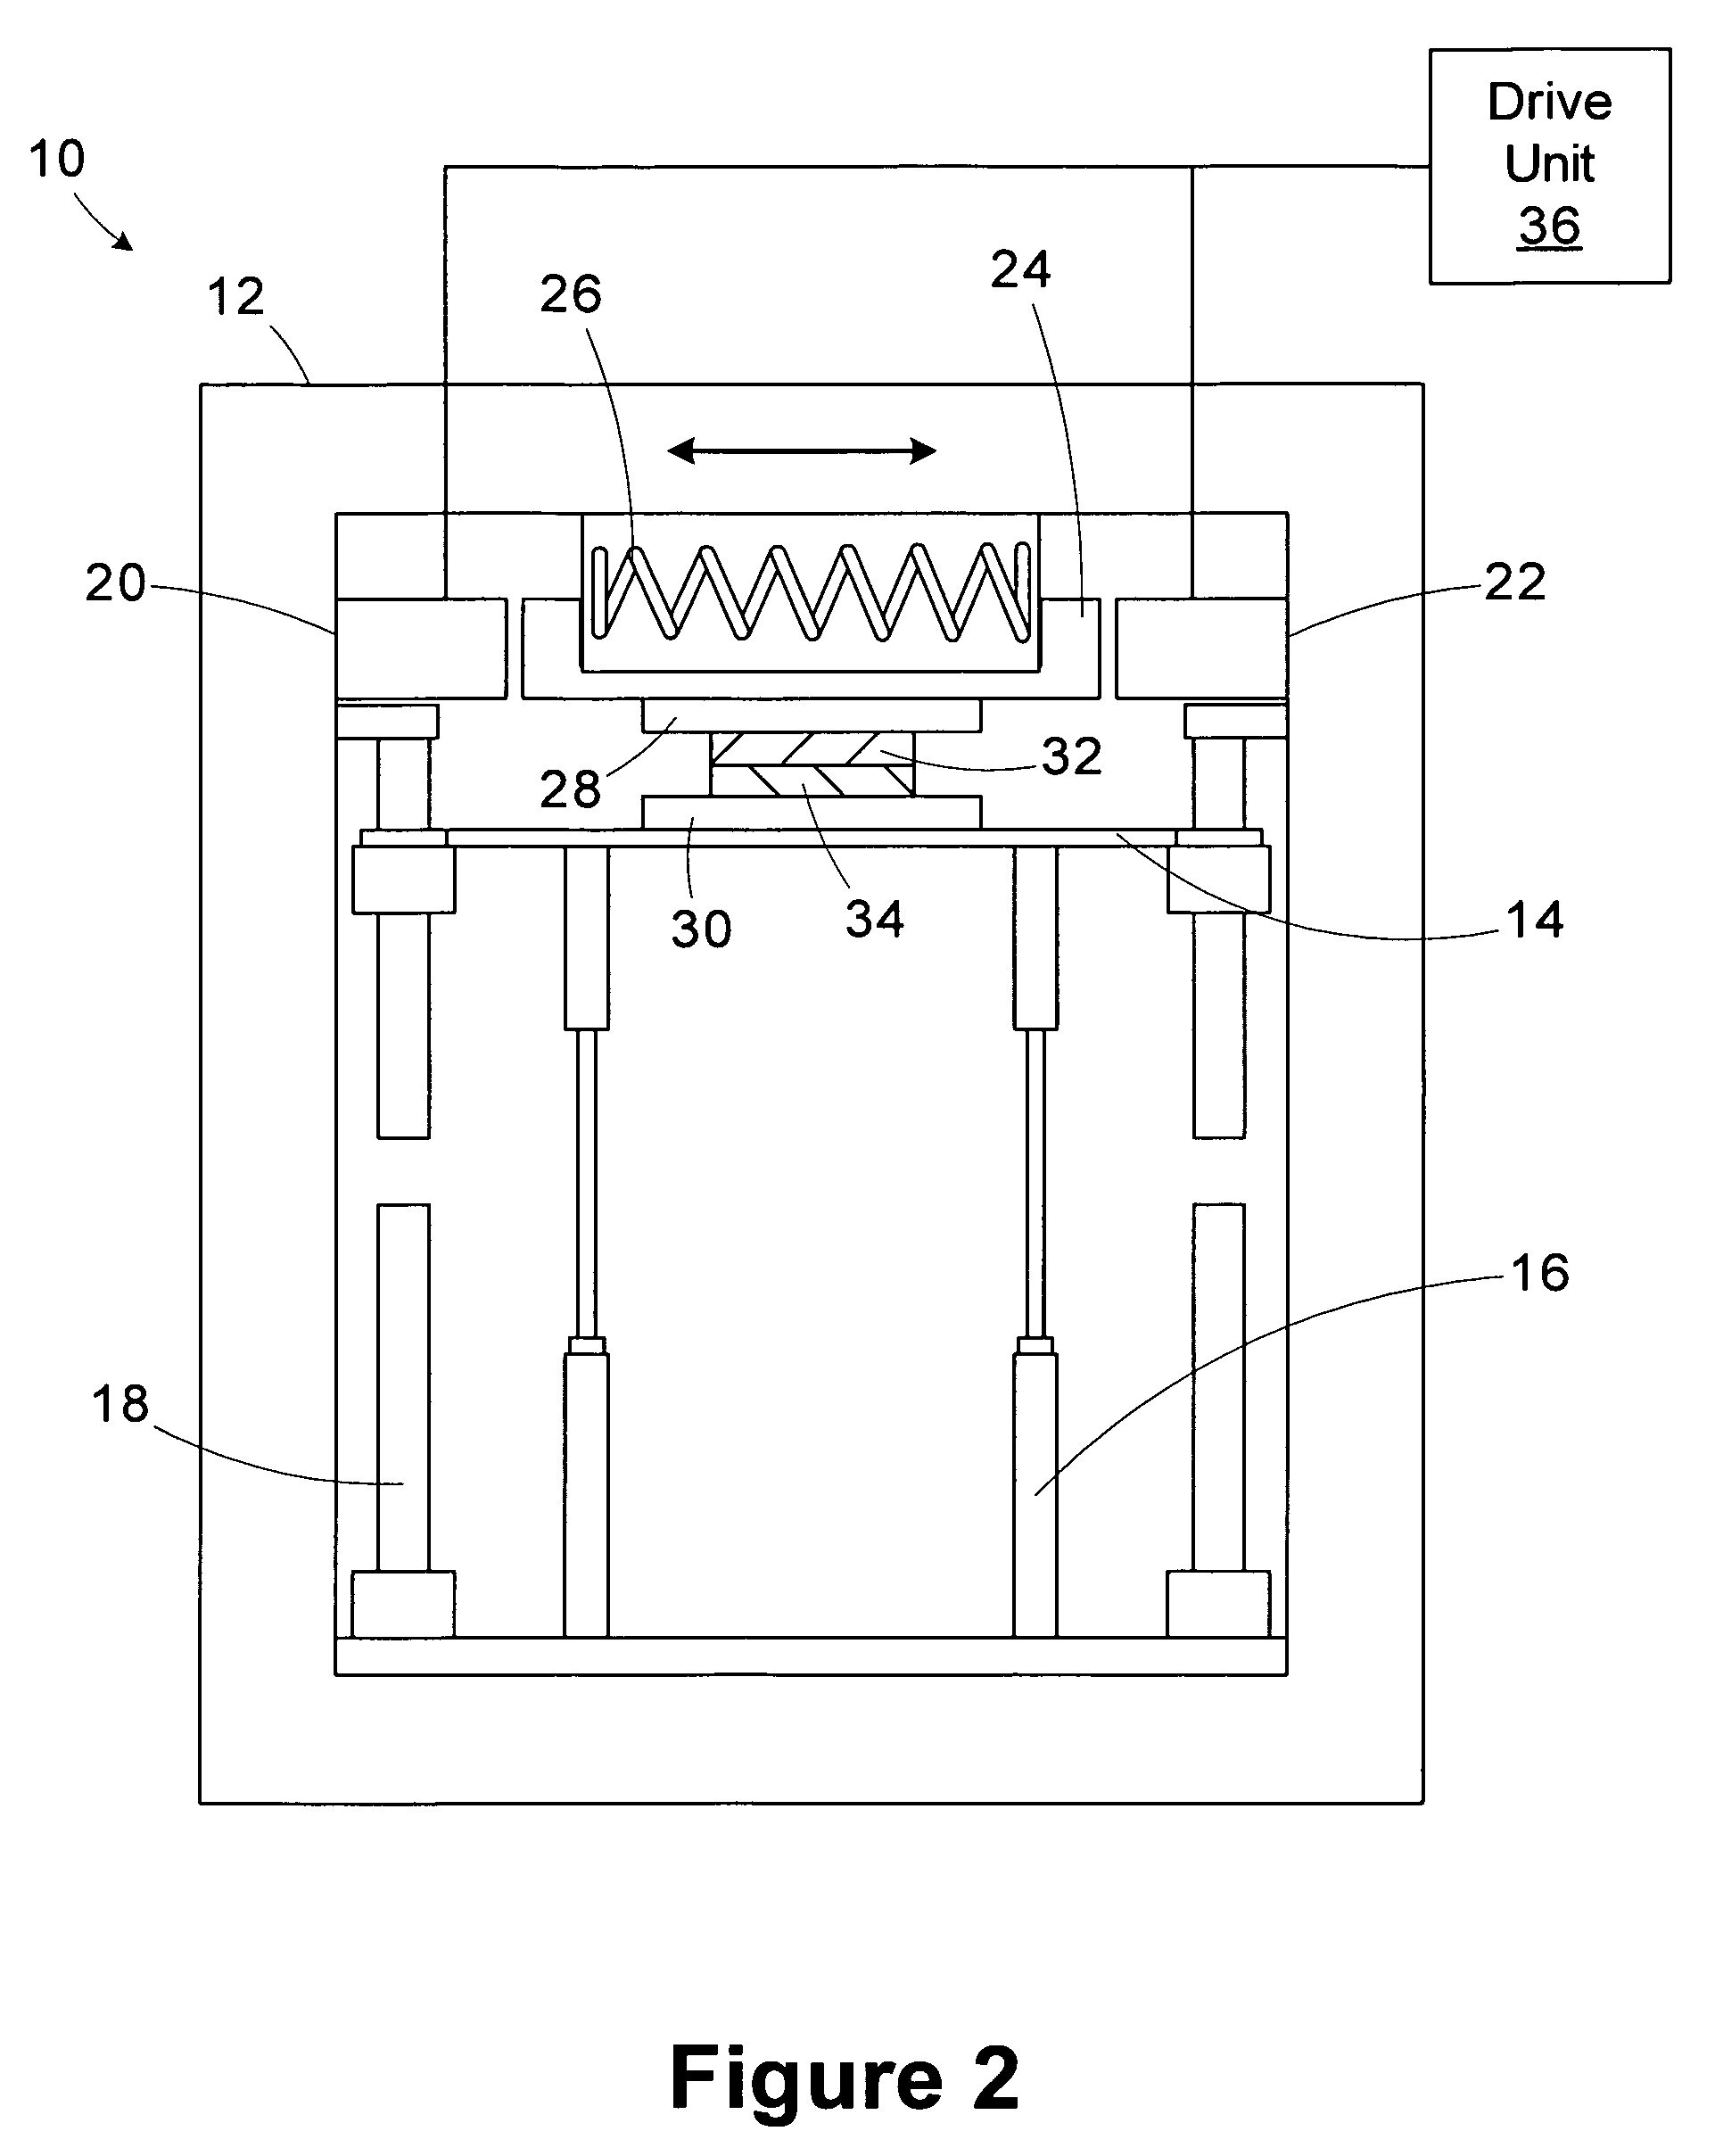 Drive unit for controlling reciprocating electromagnets